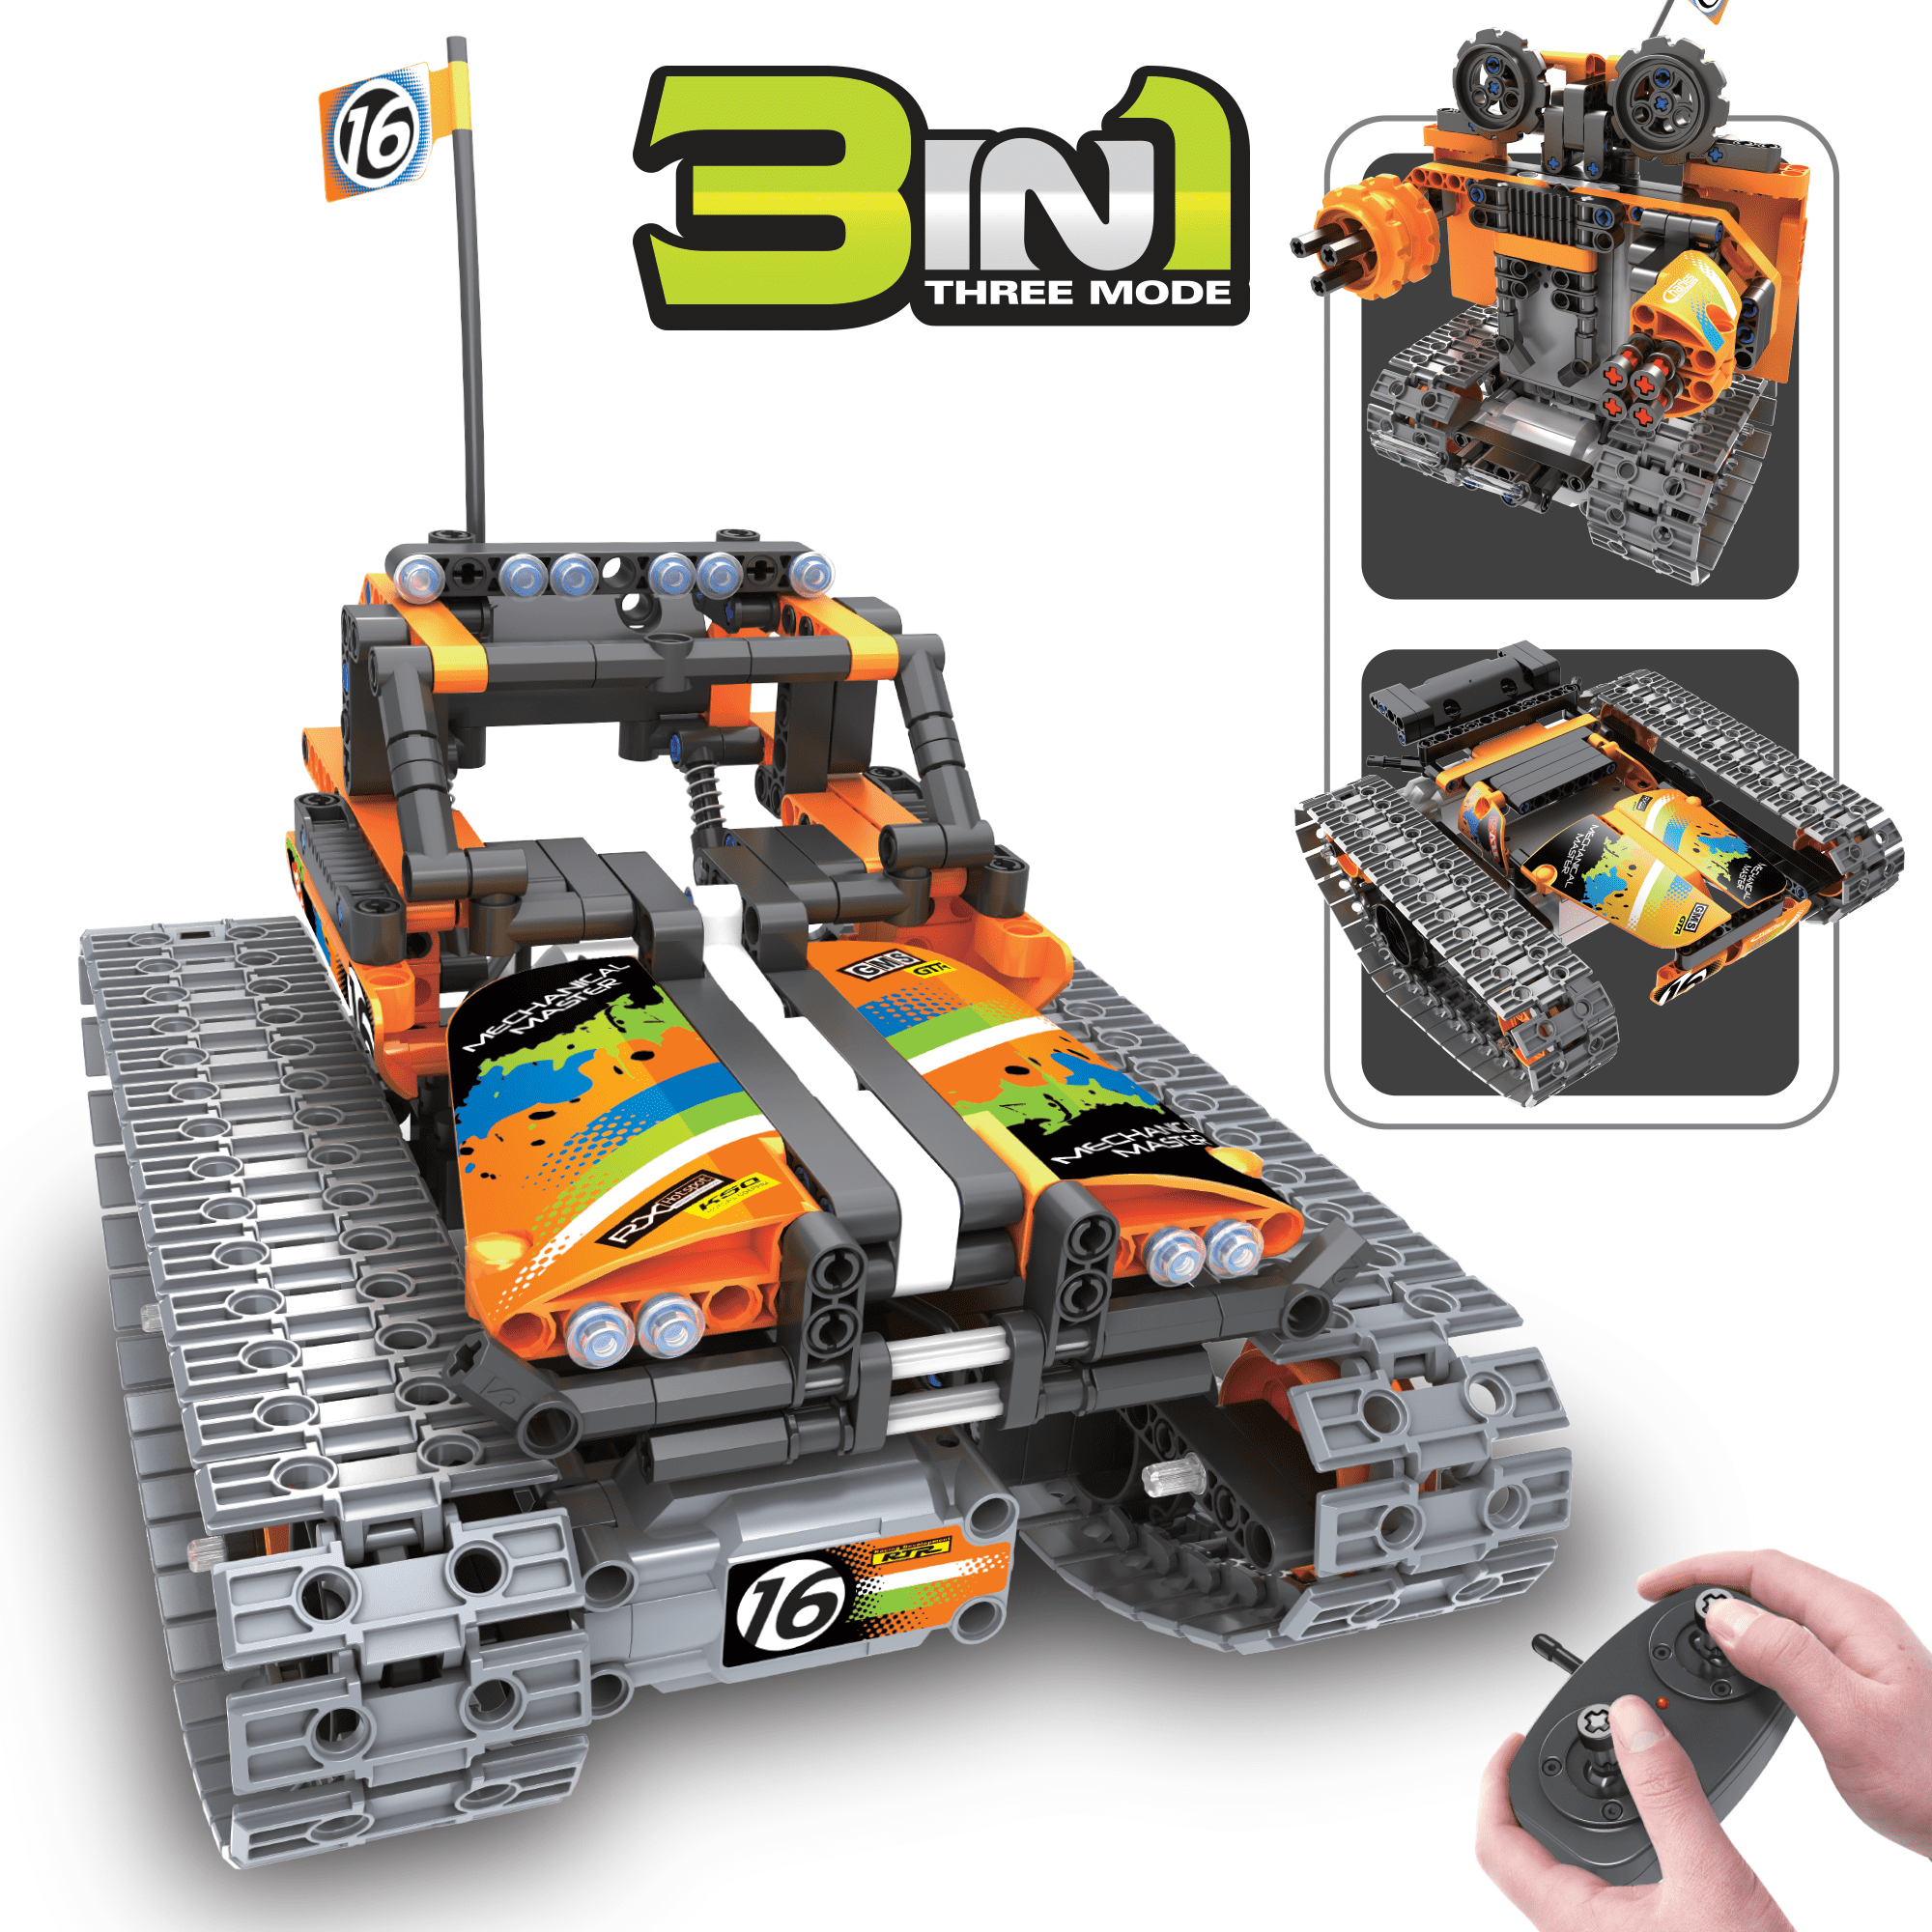 Kididdo Kids Robot Stem Toys in Remote Control Car Building Kit for Boys  8-12 Christmas Gift Toy for Boys Ages 10 11 12